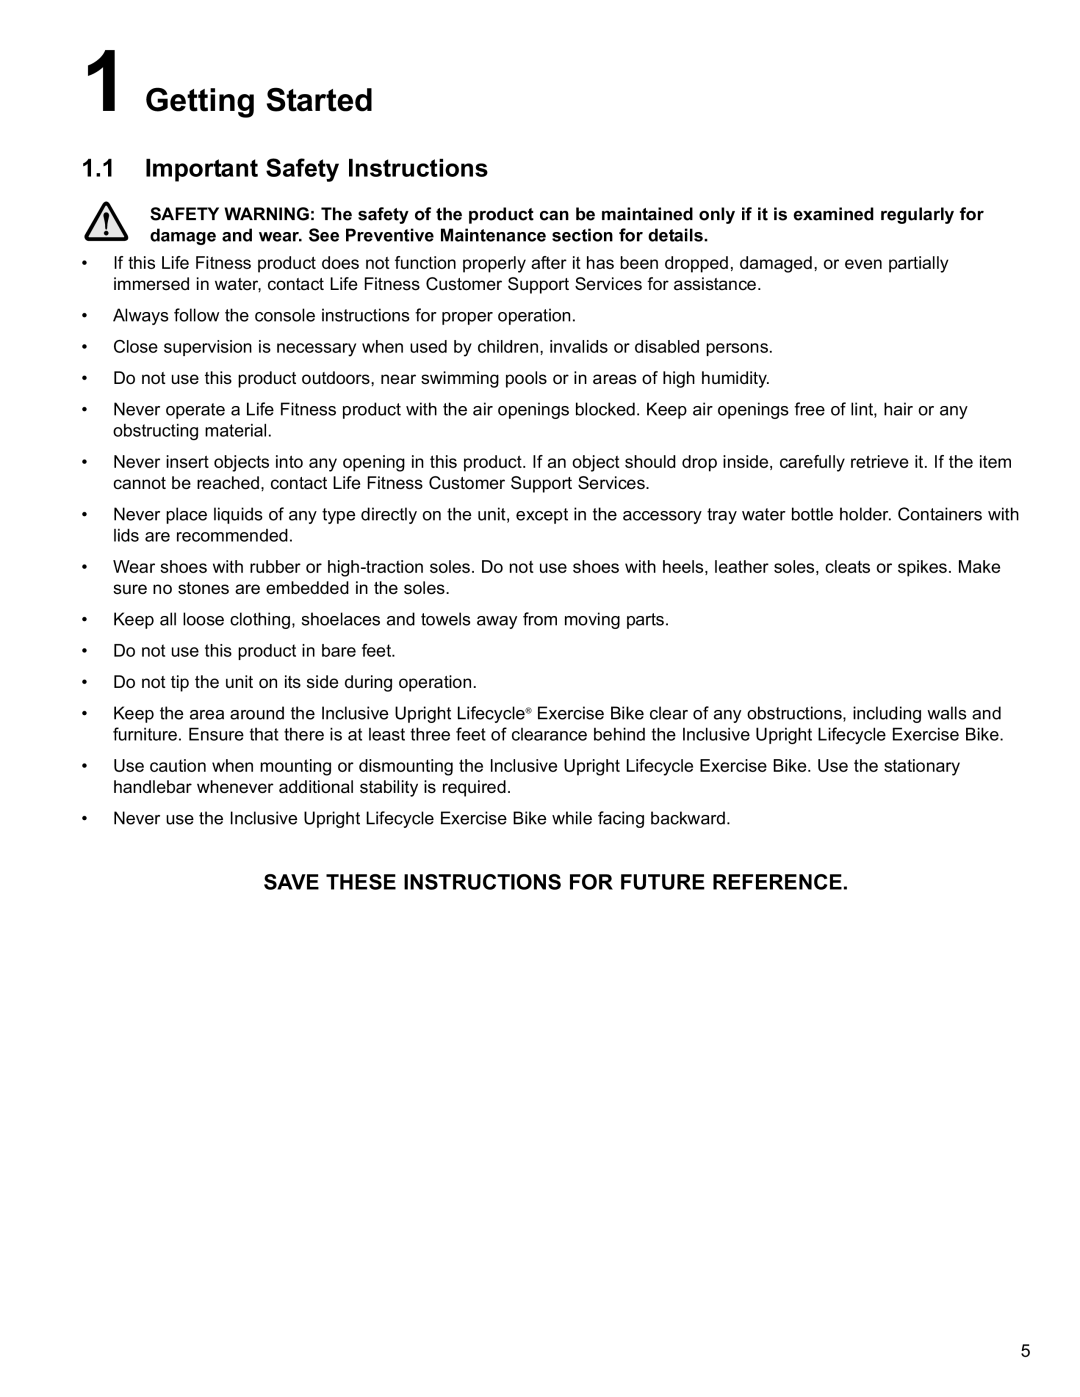 Life Fitness 95C owner manual Getting Started, Important Safety Instructions, Save These Instructions For Future Reference 